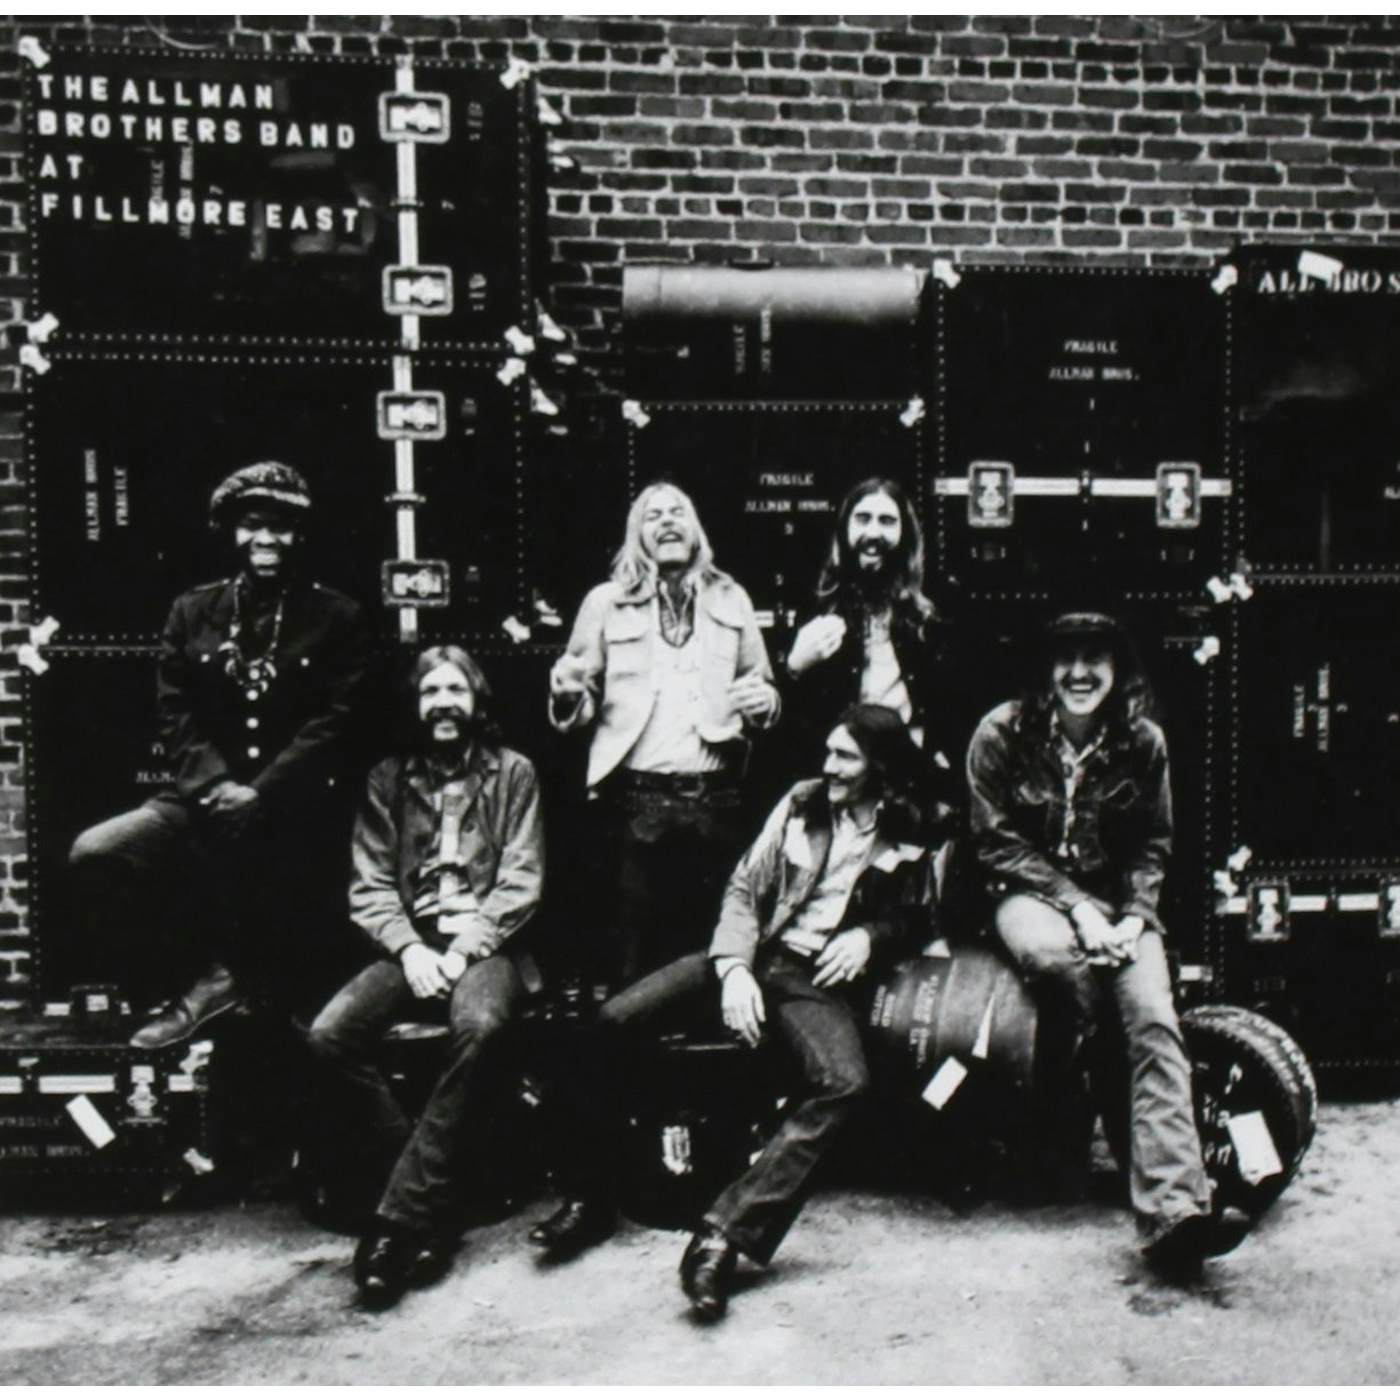 Allman Brothers Band LIVE AT FILLMORE EAST Vinyl Record